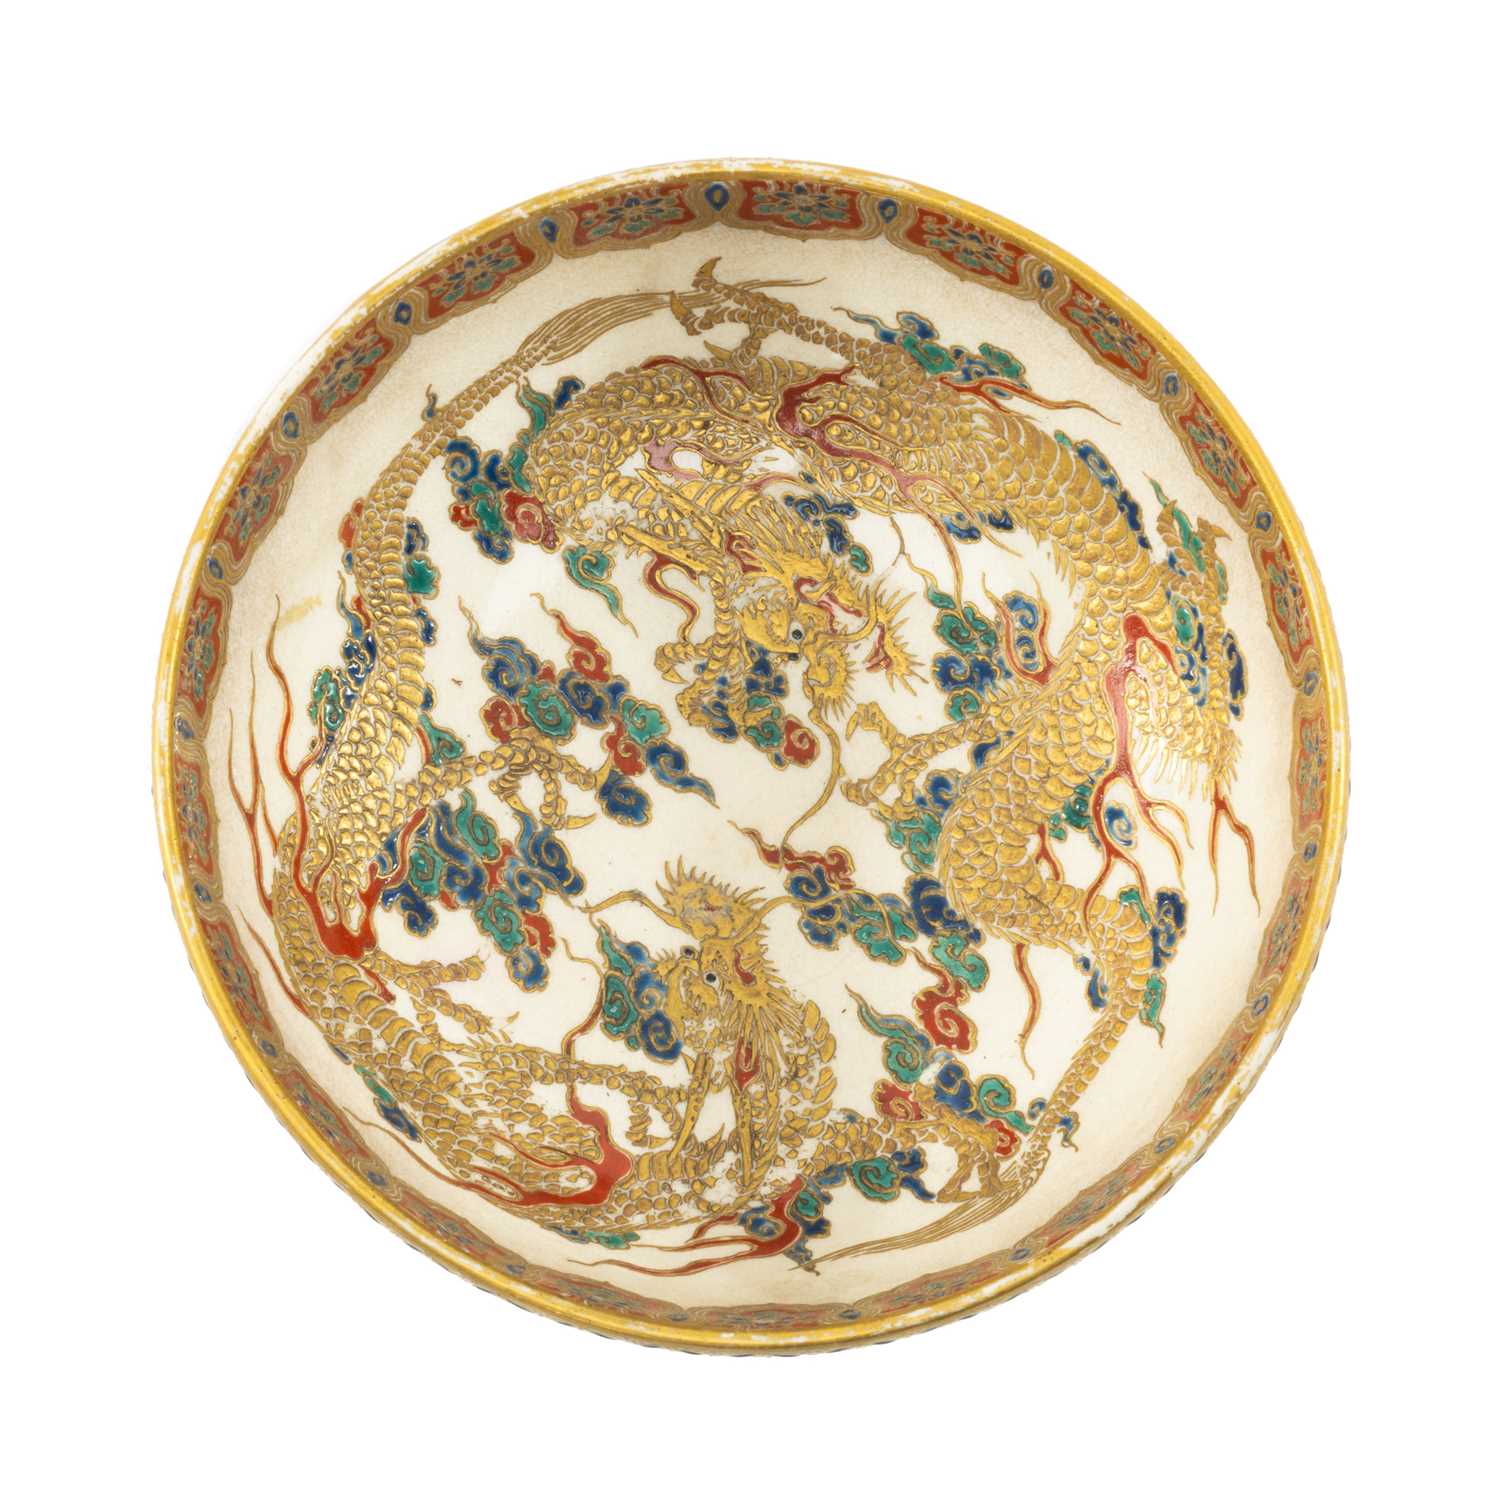 JAPANESE SATSUMA PEDESTAL BOWL, Meiji Period, decorated inside and out with 4 three-clawed dragons - Image 2 of 3